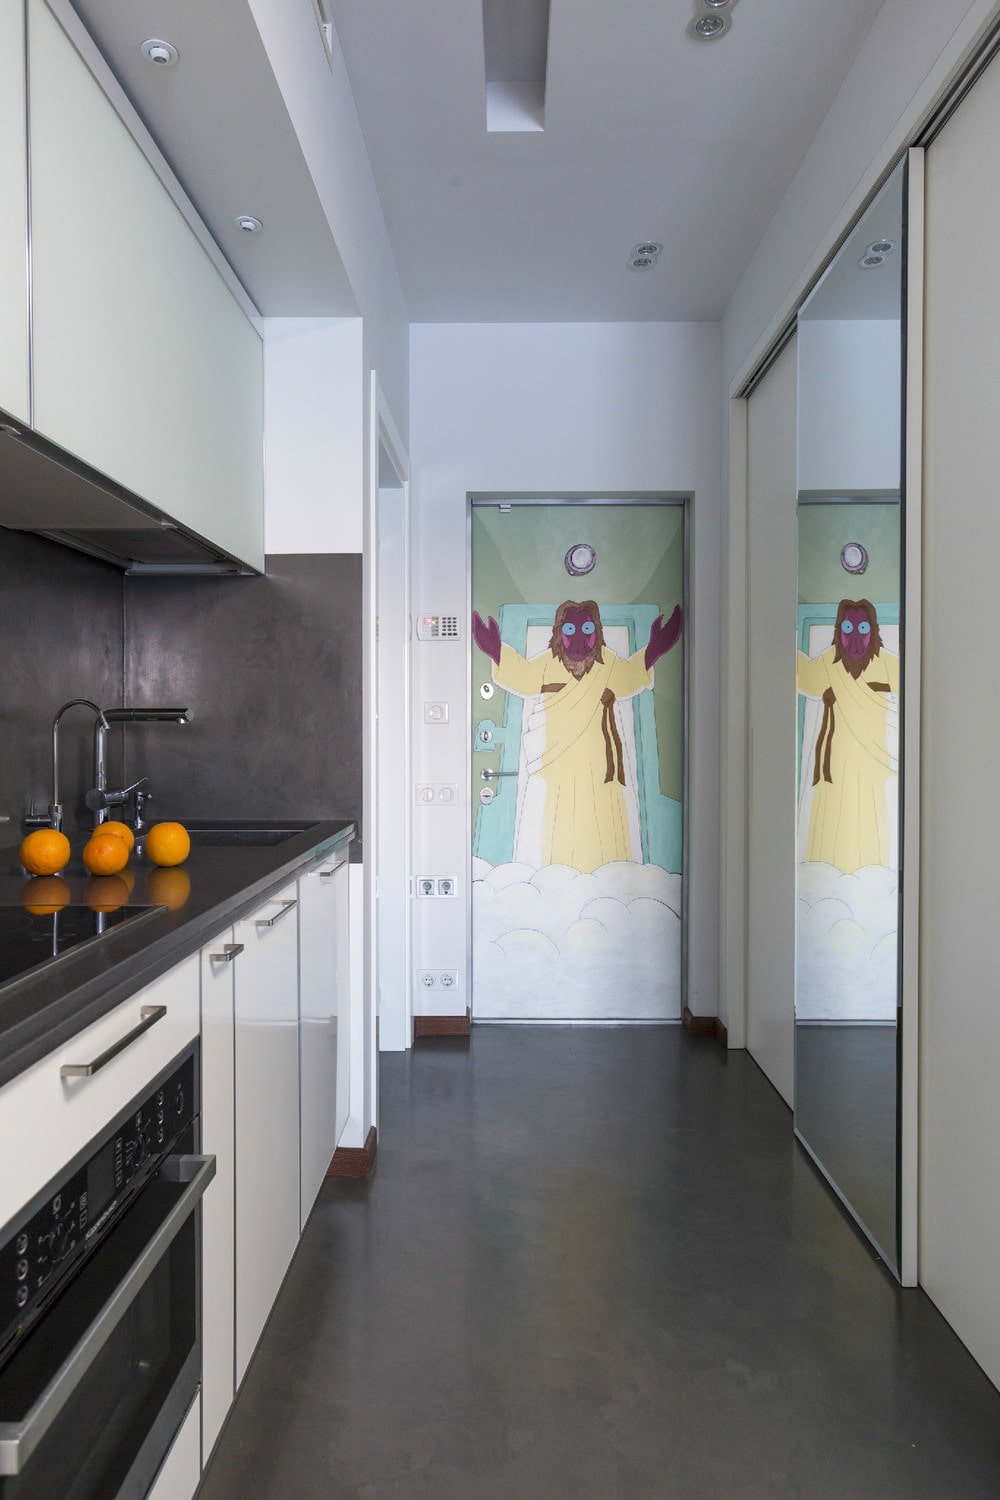 Kitchen in the design of a two-room apartment of 43 sq. m.